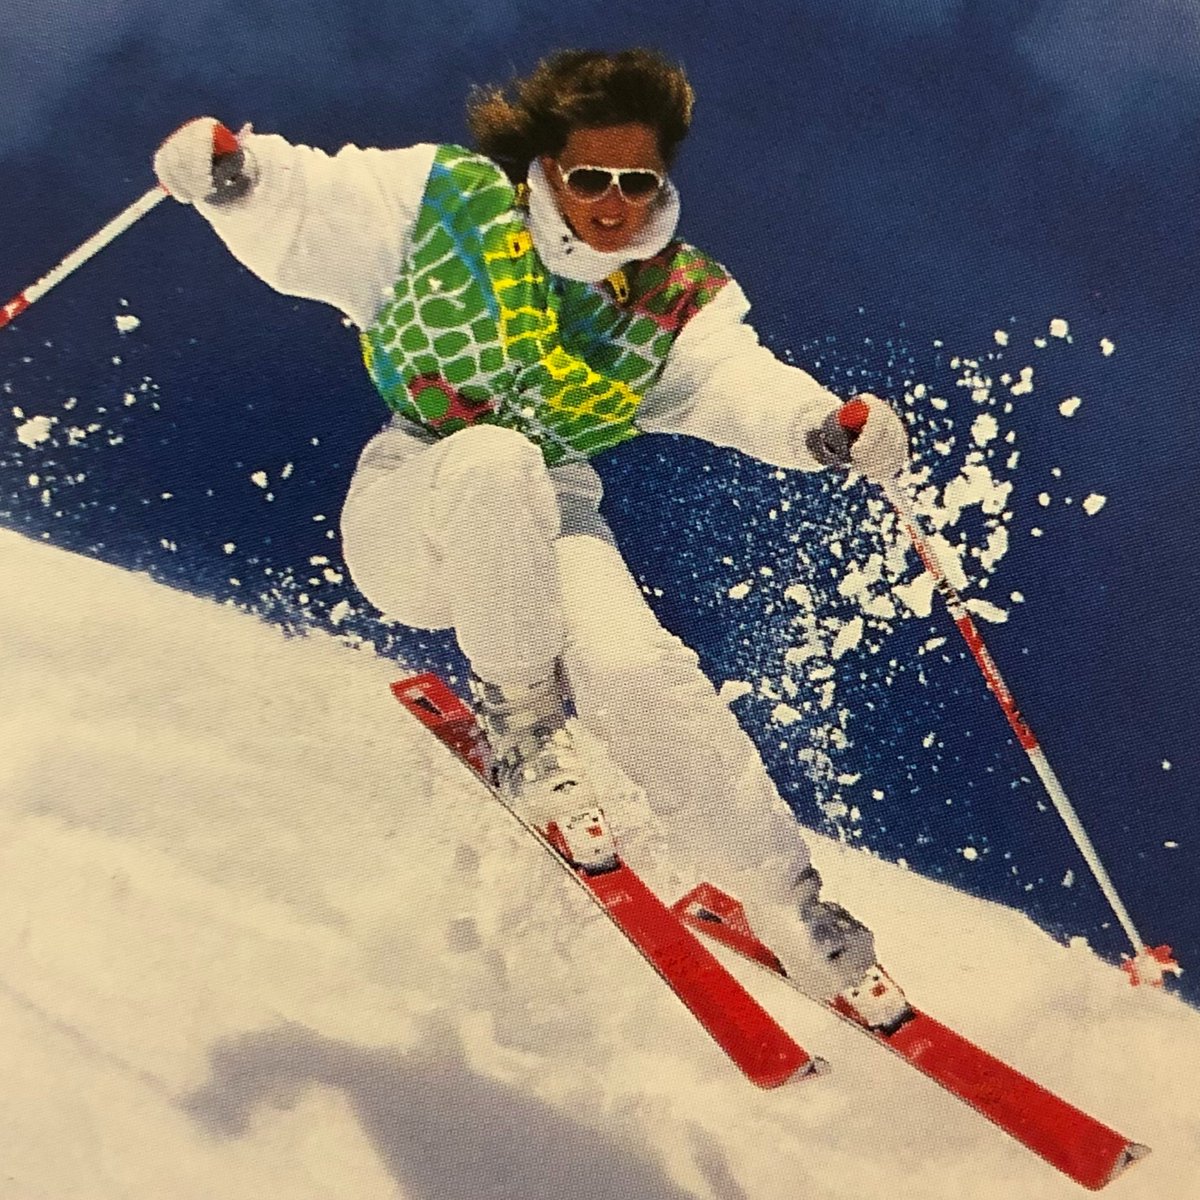 The gettin' is as good as ever! 50 years later and we still can’t get enough. 1972-1992 ski collection – Friendly reminder, April 16 is your last chance to receive 10 buddy tickets when you purchase an Epic Pass. Link below for more info: bit.ly/2I3jeCx